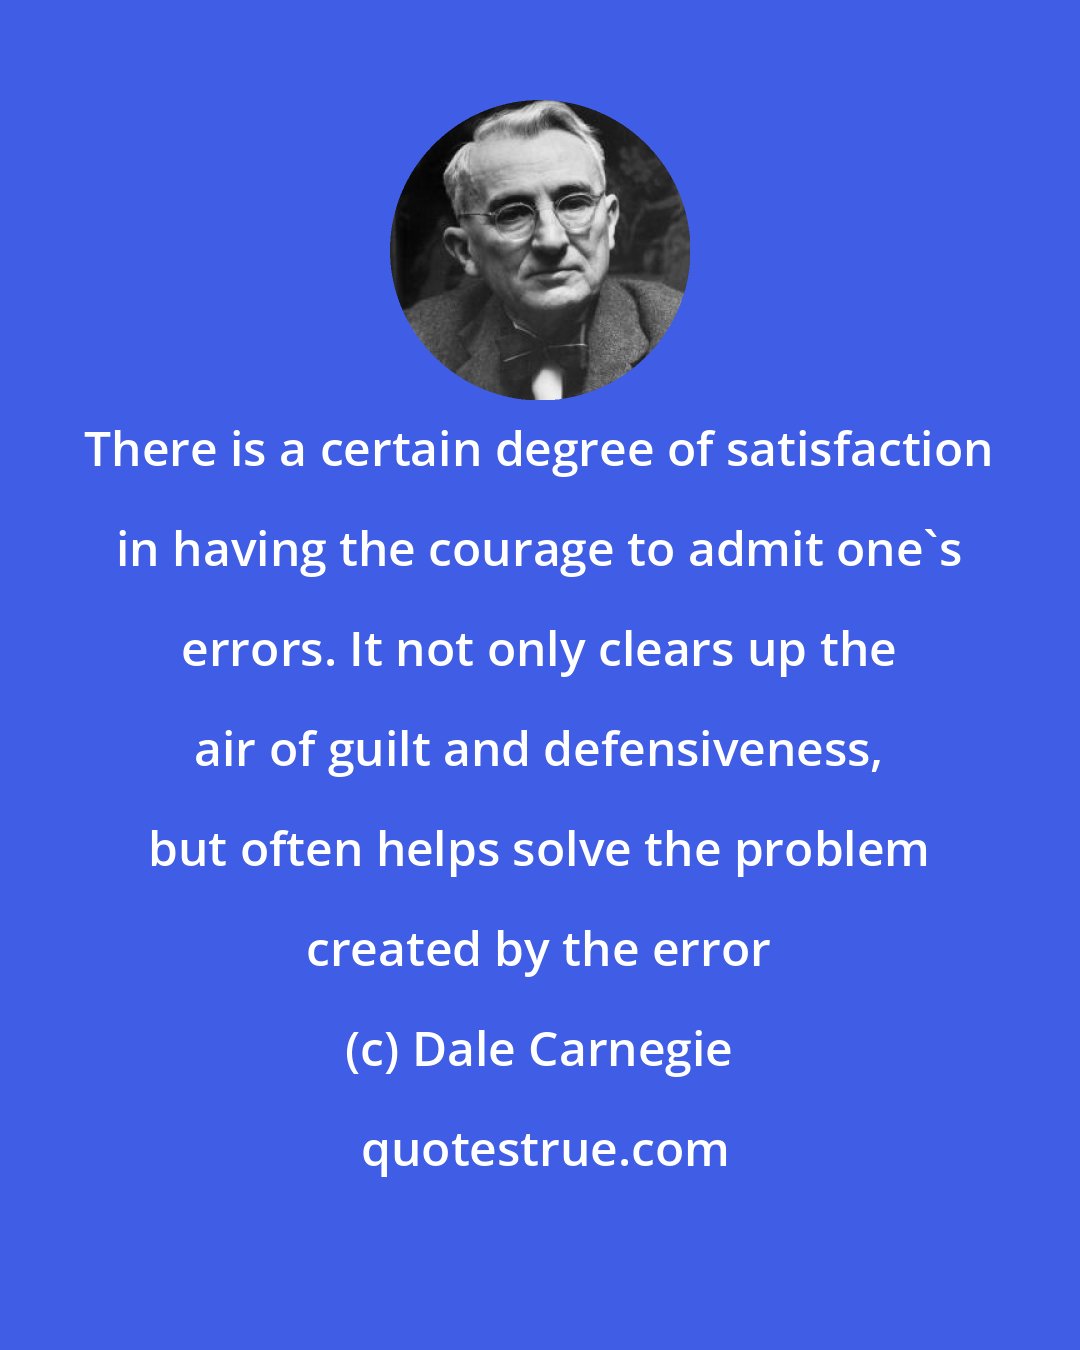 Dale Carnegie: There is a certain degree of satisfaction in having the courage to admit one's errors. It not only clears up the air of guilt and defensiveness, but often helps solve the problem created by the error